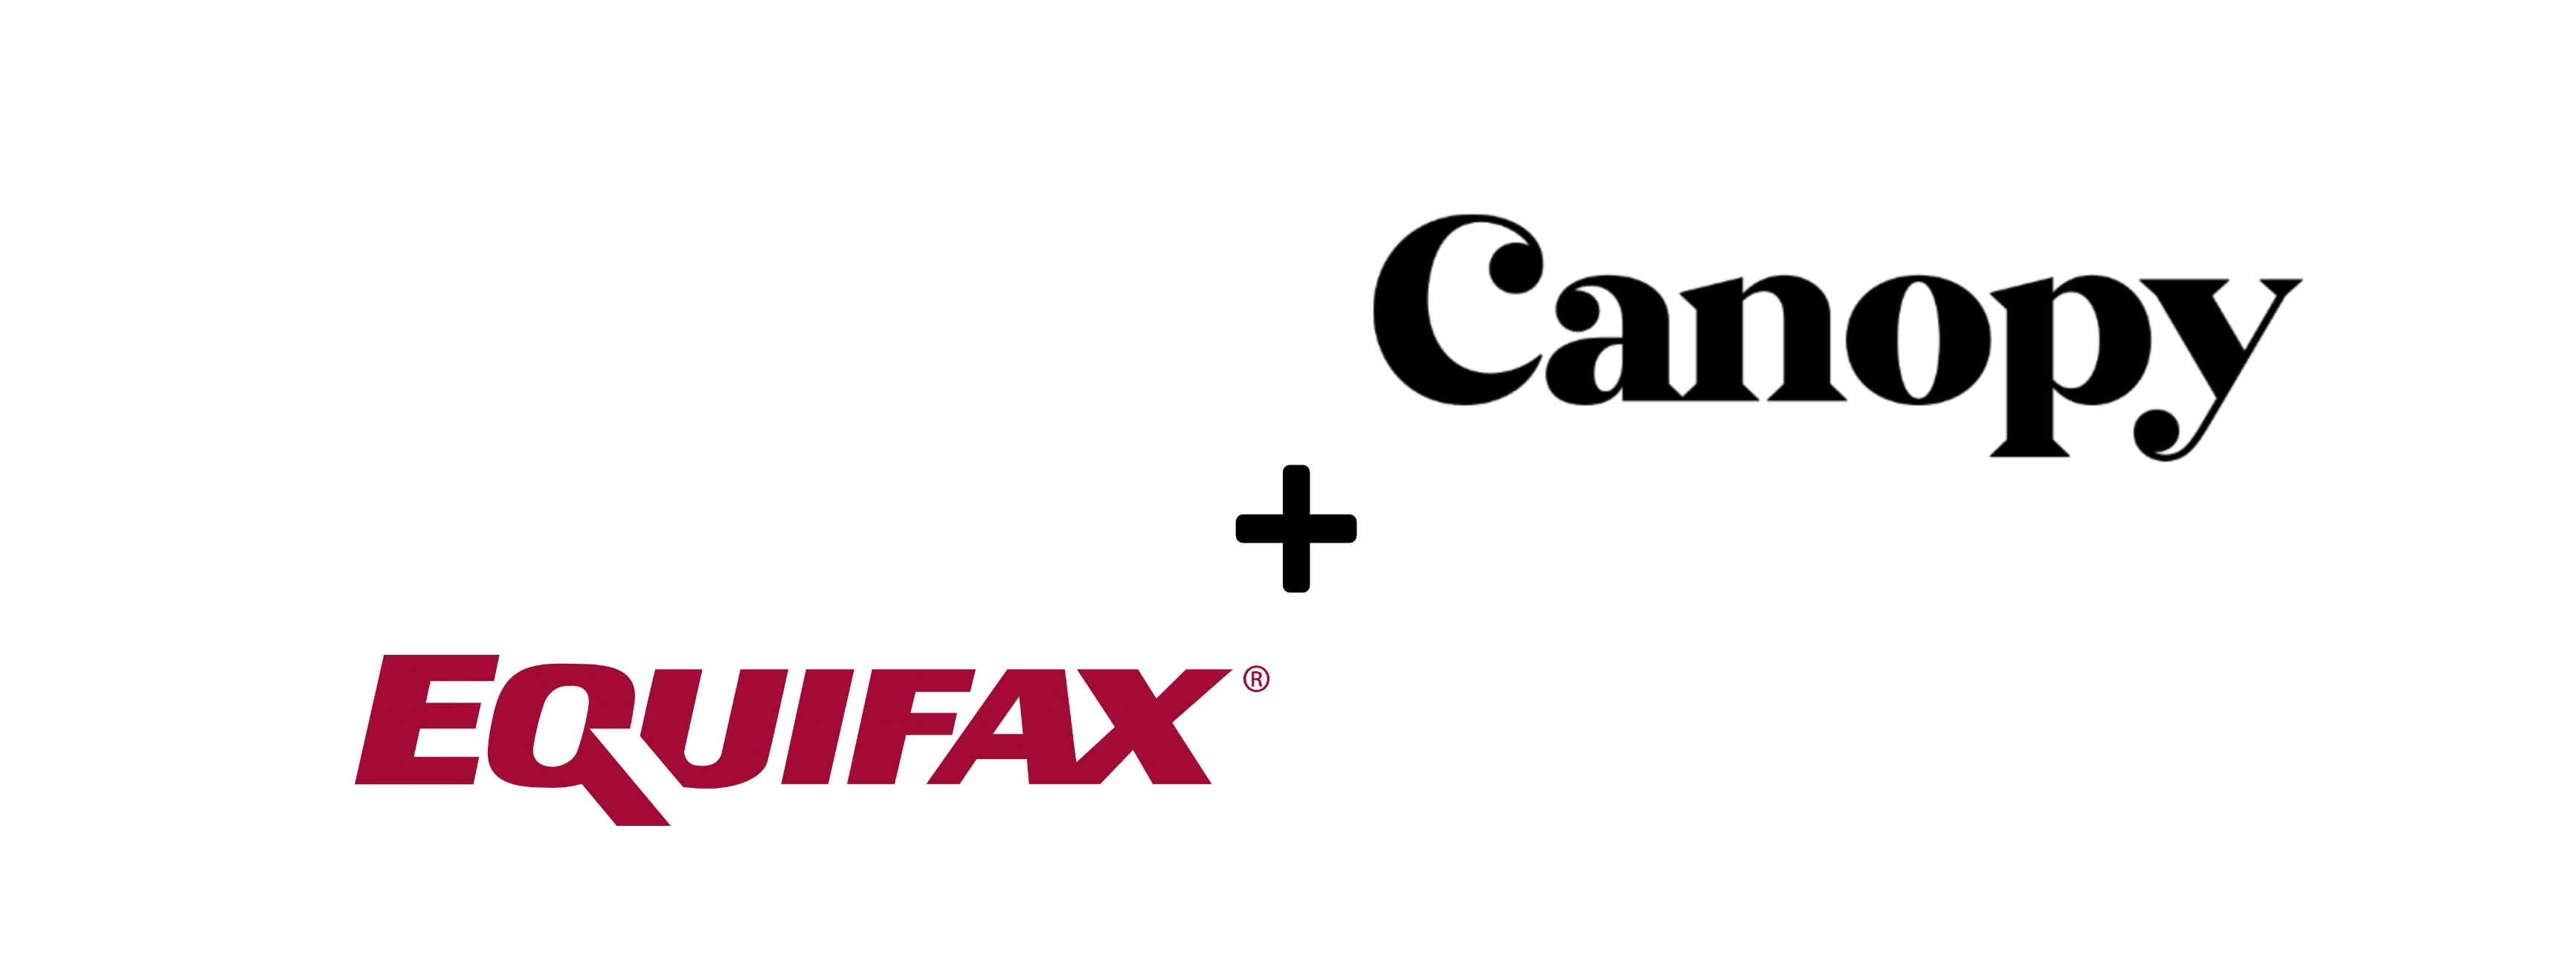 Equifax UK Partners with Canopy to Improve Tenants’ Access to Credit 